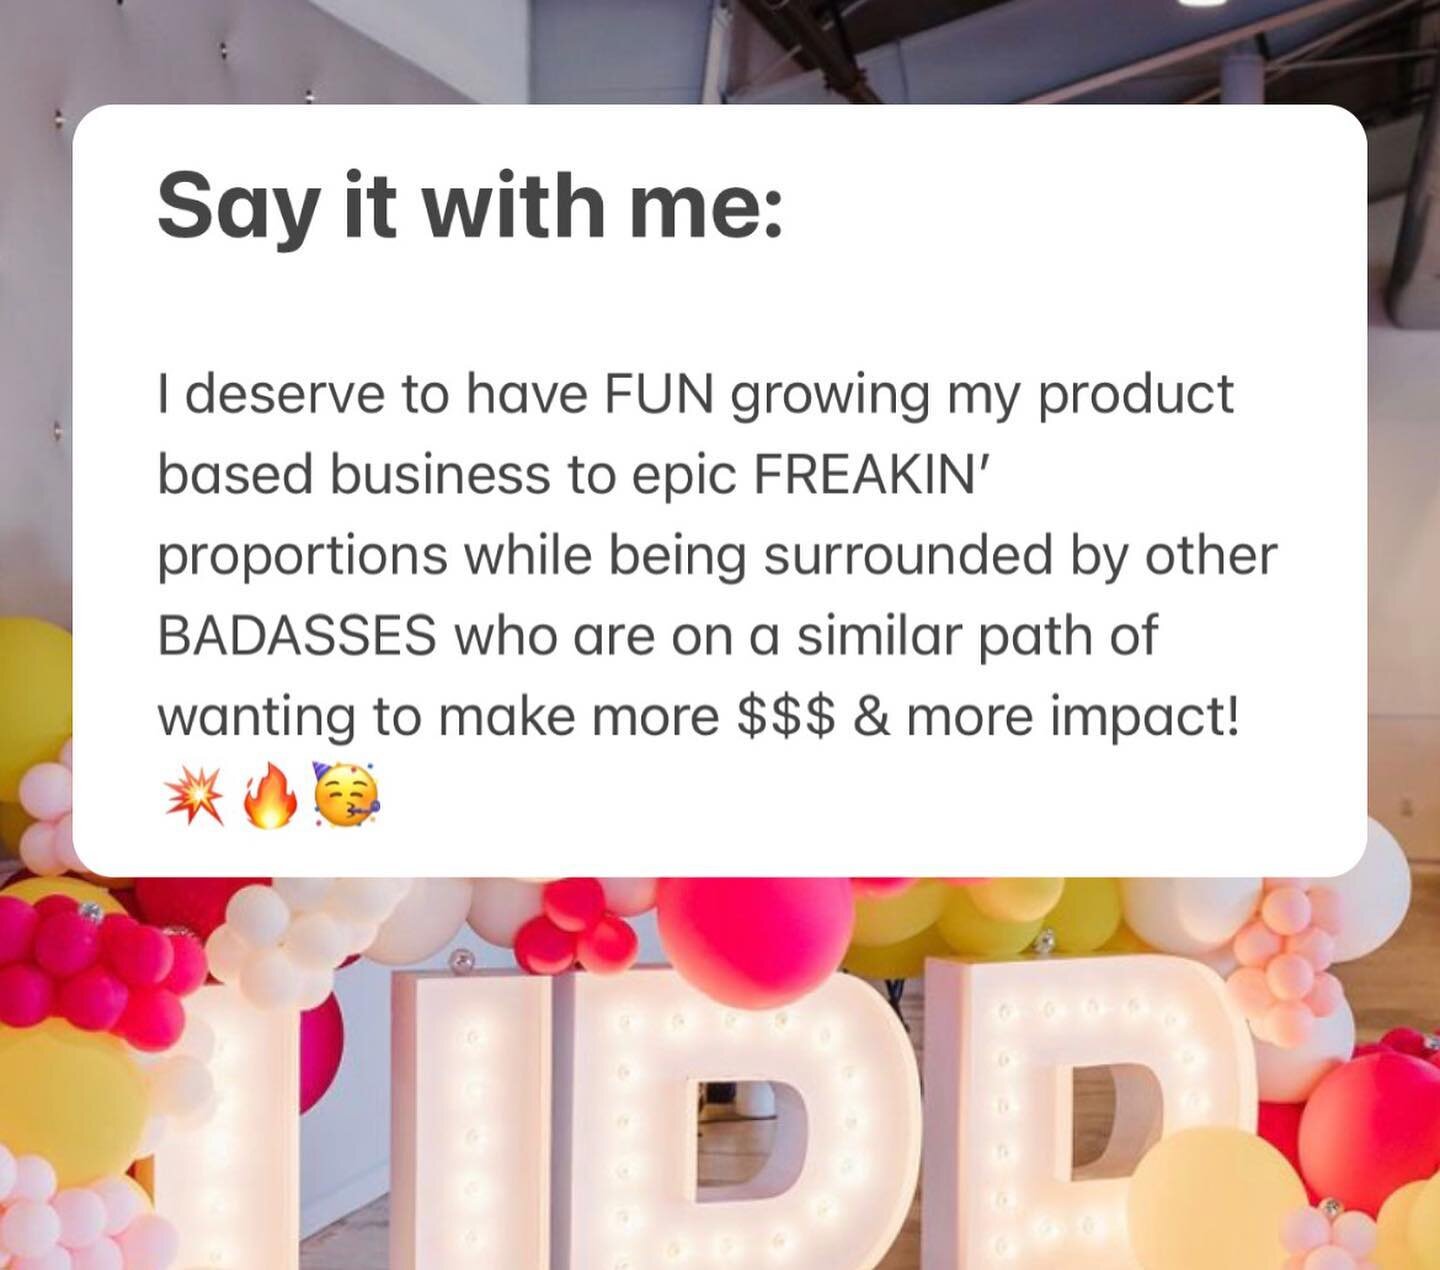 Give us a 💥 emoji if you agree!! 

Growing a thriving business is a team effort. We want you on our team and we want to be on yours! If you haven&rsquo;t taken the leap to get your UPP ticket yet, what are you waiting for?!??

There are 3 (count &ls